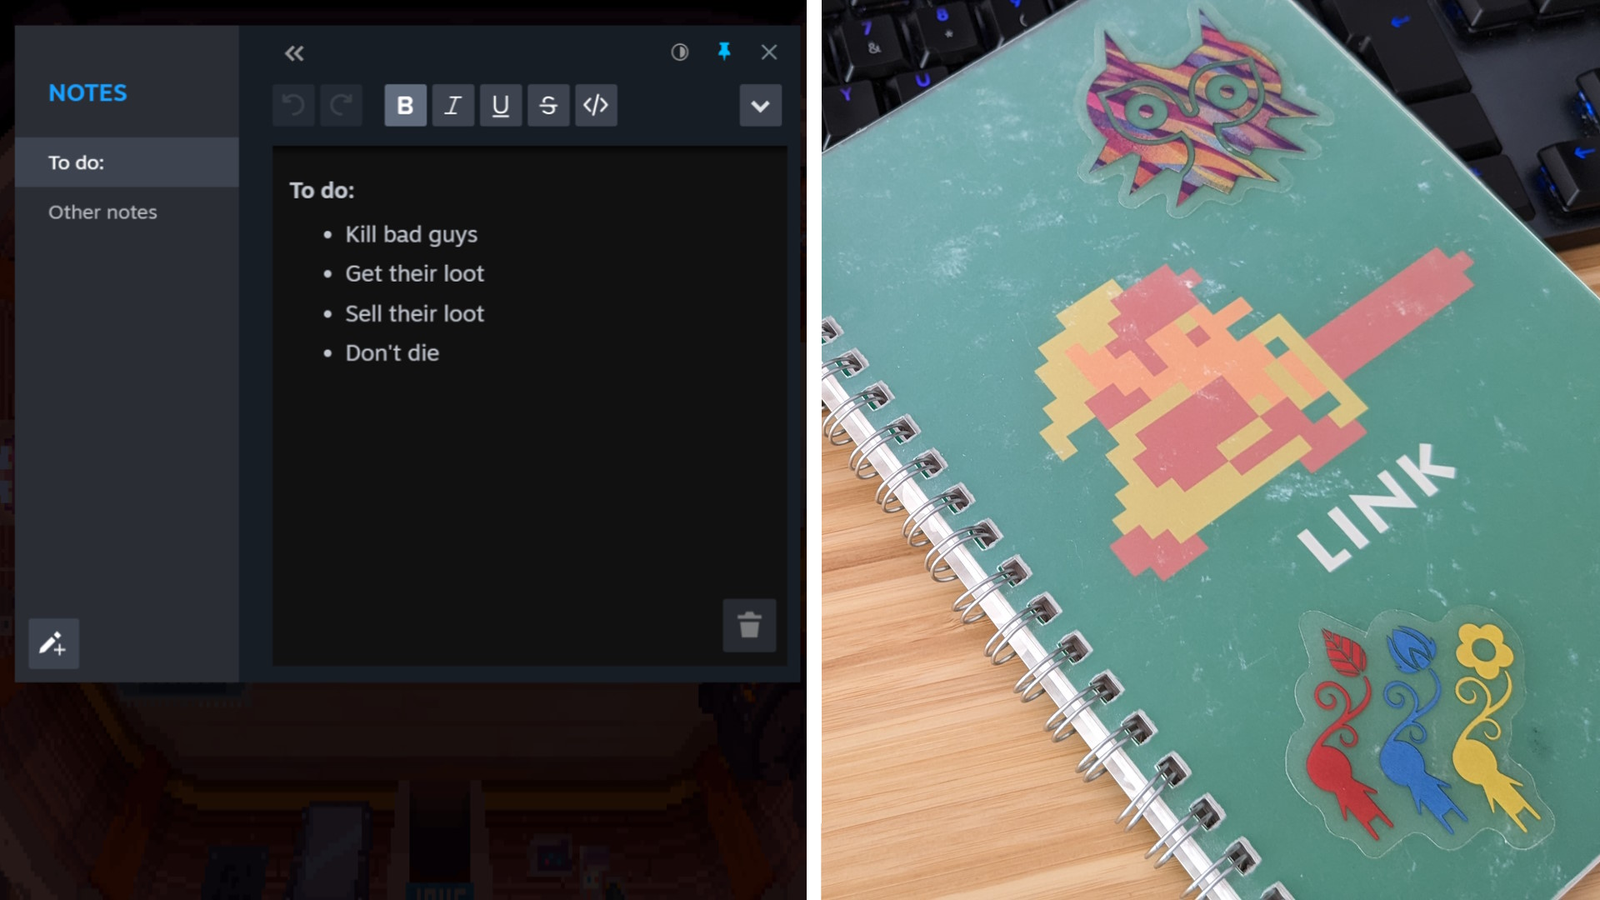 Steam is getting its own notes app, so RIP my gaming notebook, I